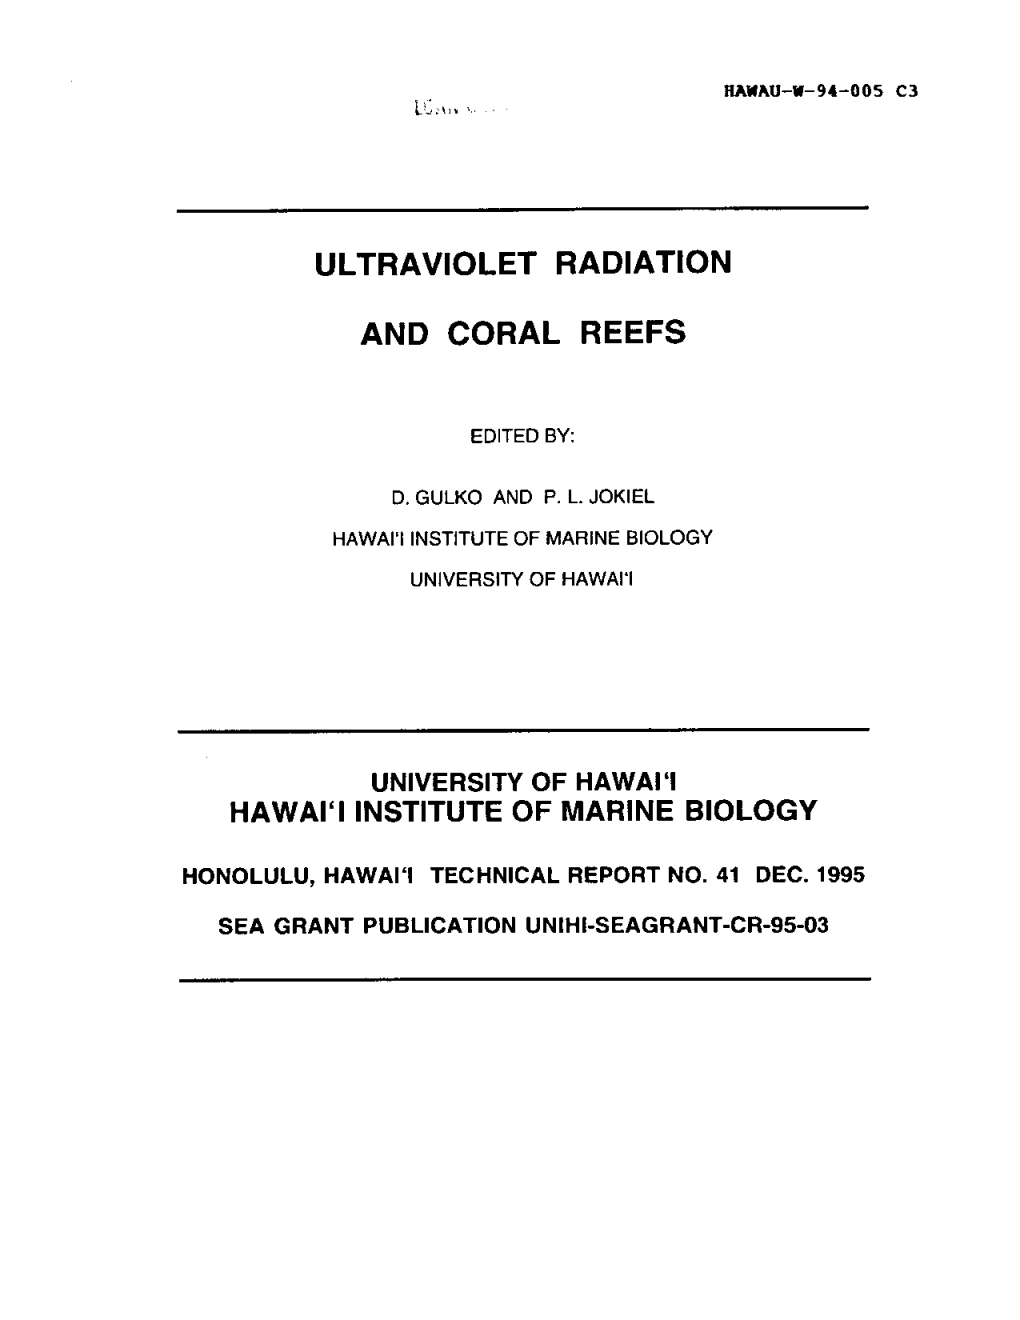 Ultraviolet Radiation and Coral Reefs' Hawai'i Institute of Marine Biology